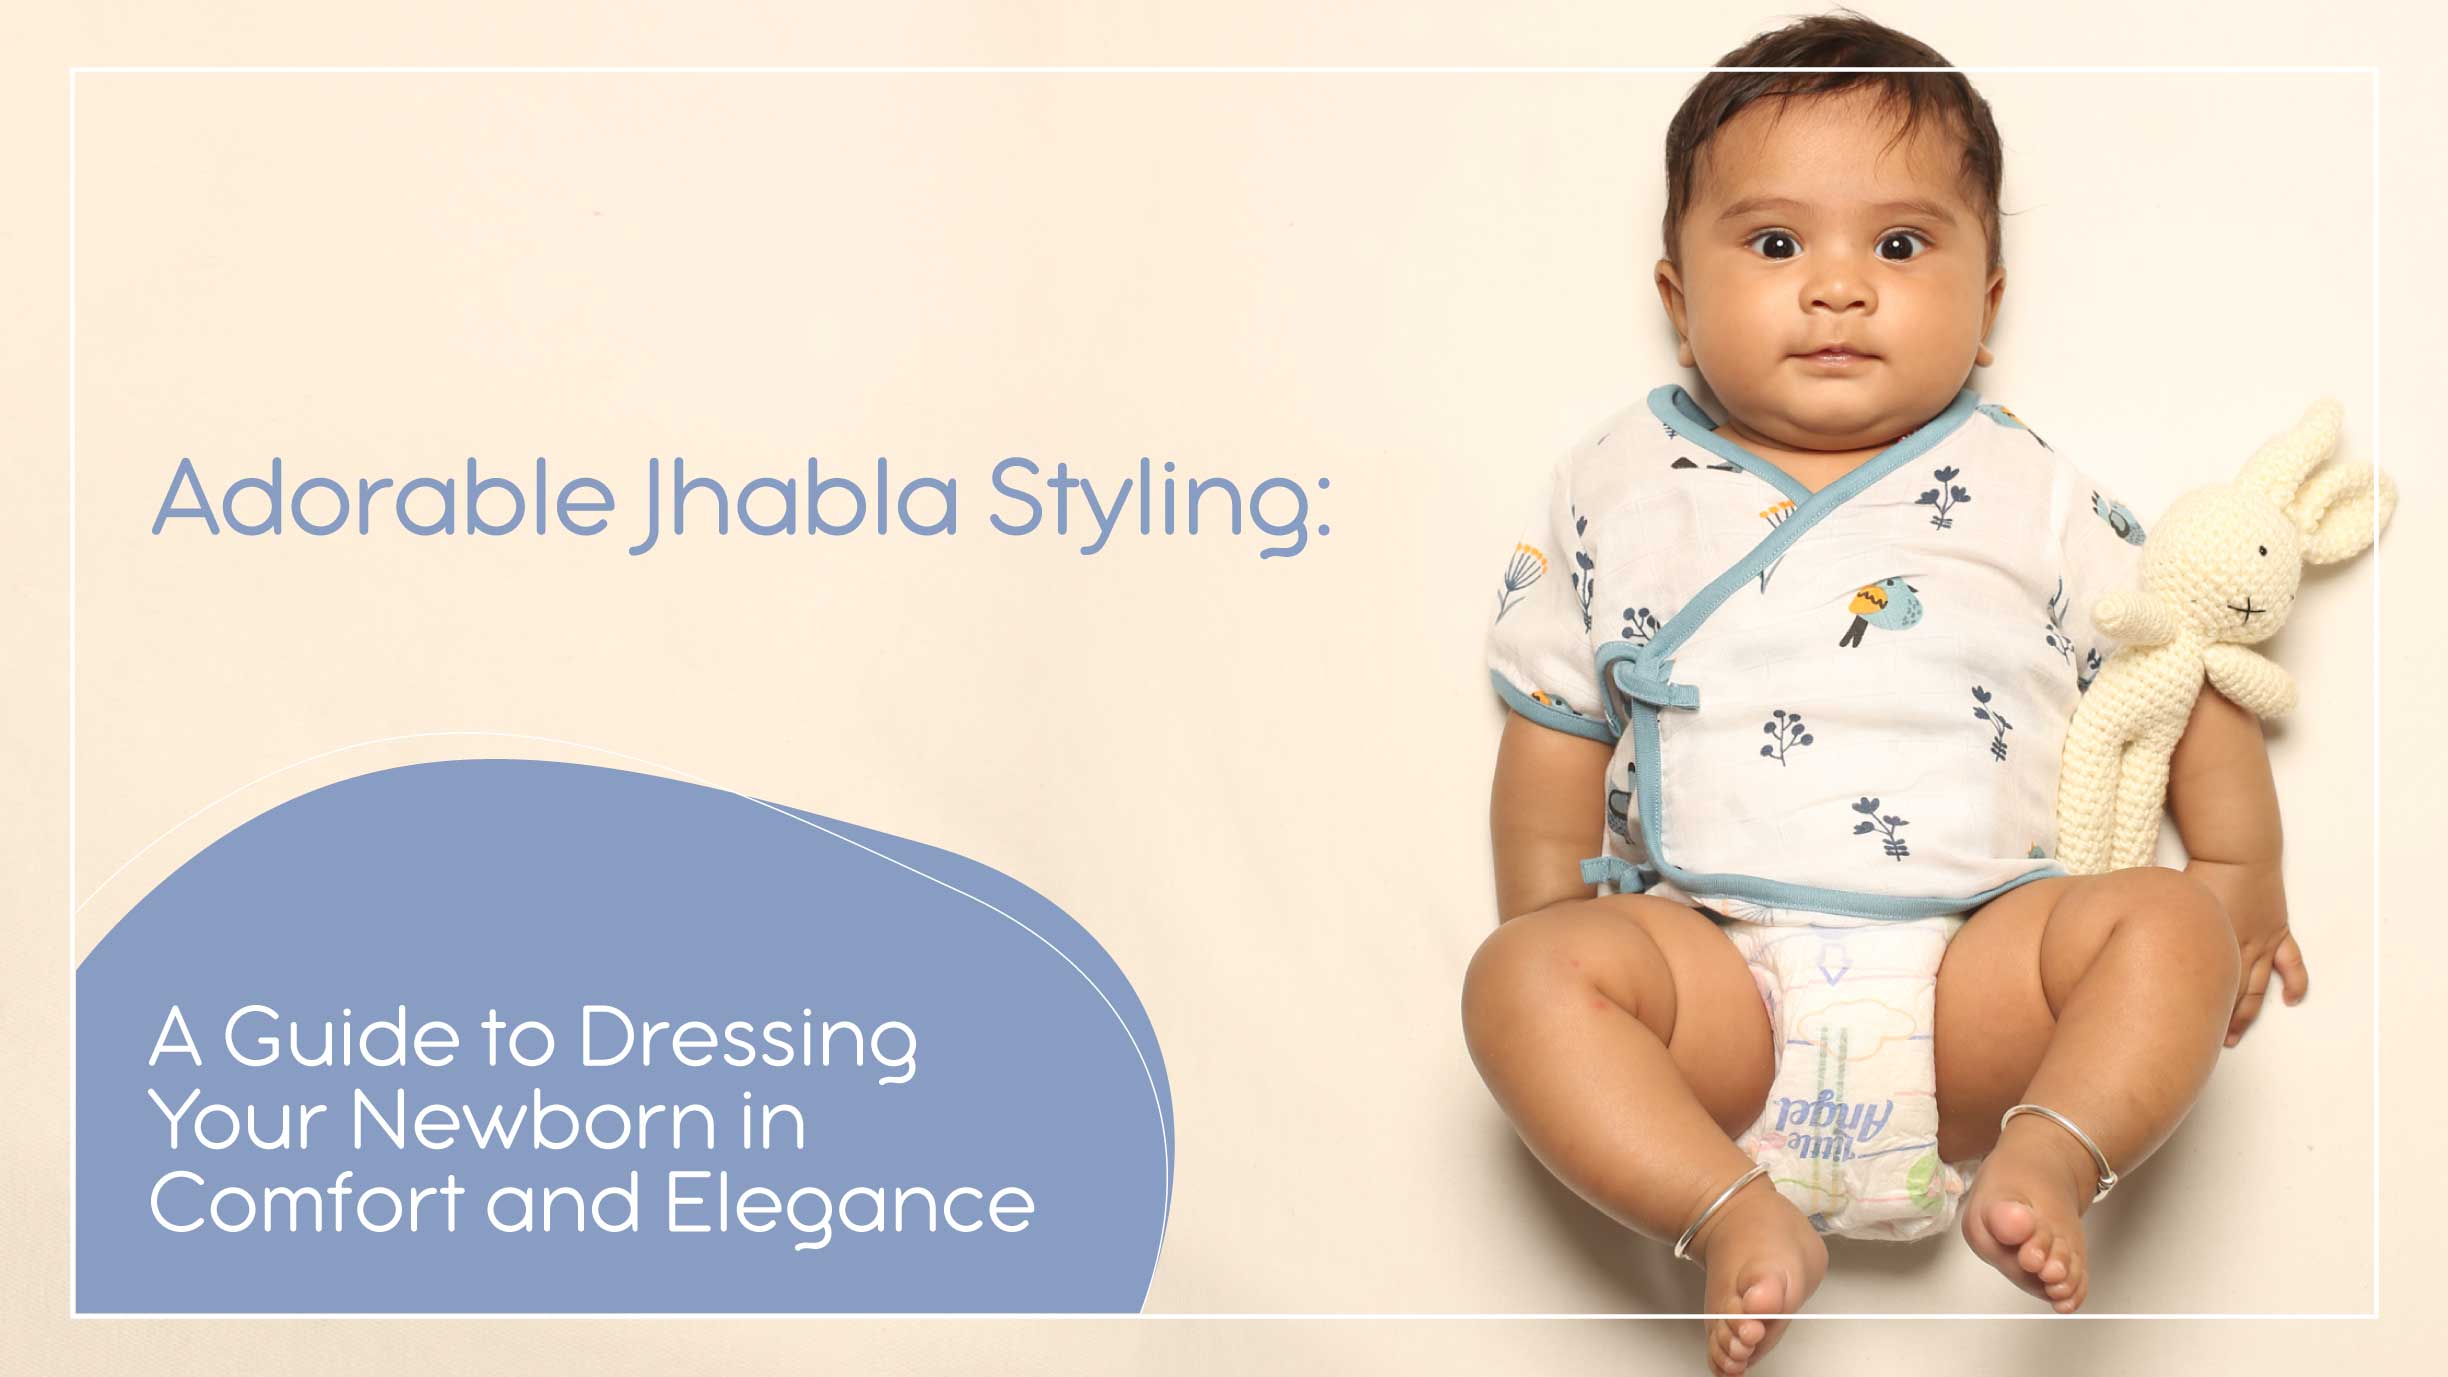 Adorable Jhabla Styling: A Guide to Dressing Your Newborn in Comfort and Elegance